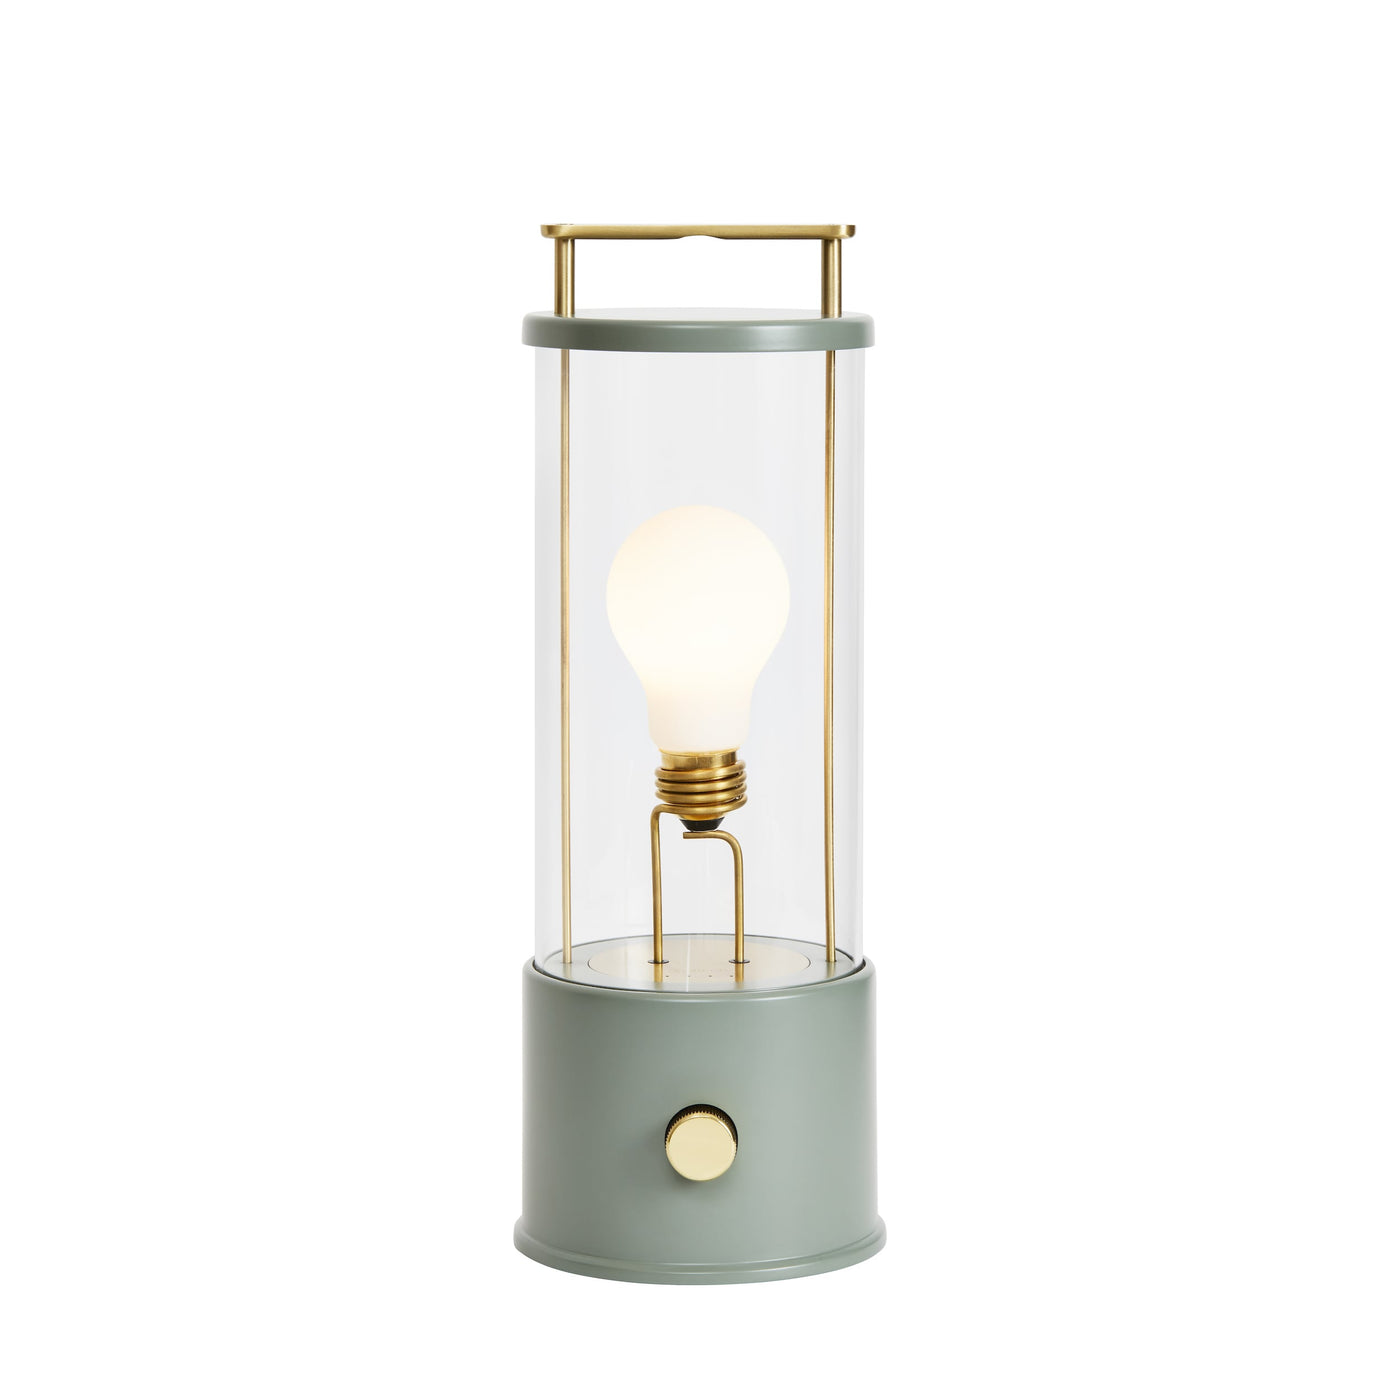 Tala x Farrow & Ball The Muse Portable Lamp. Ideal for outdoor use. Free + Fast UK delivery. #colour_pleasure-garden